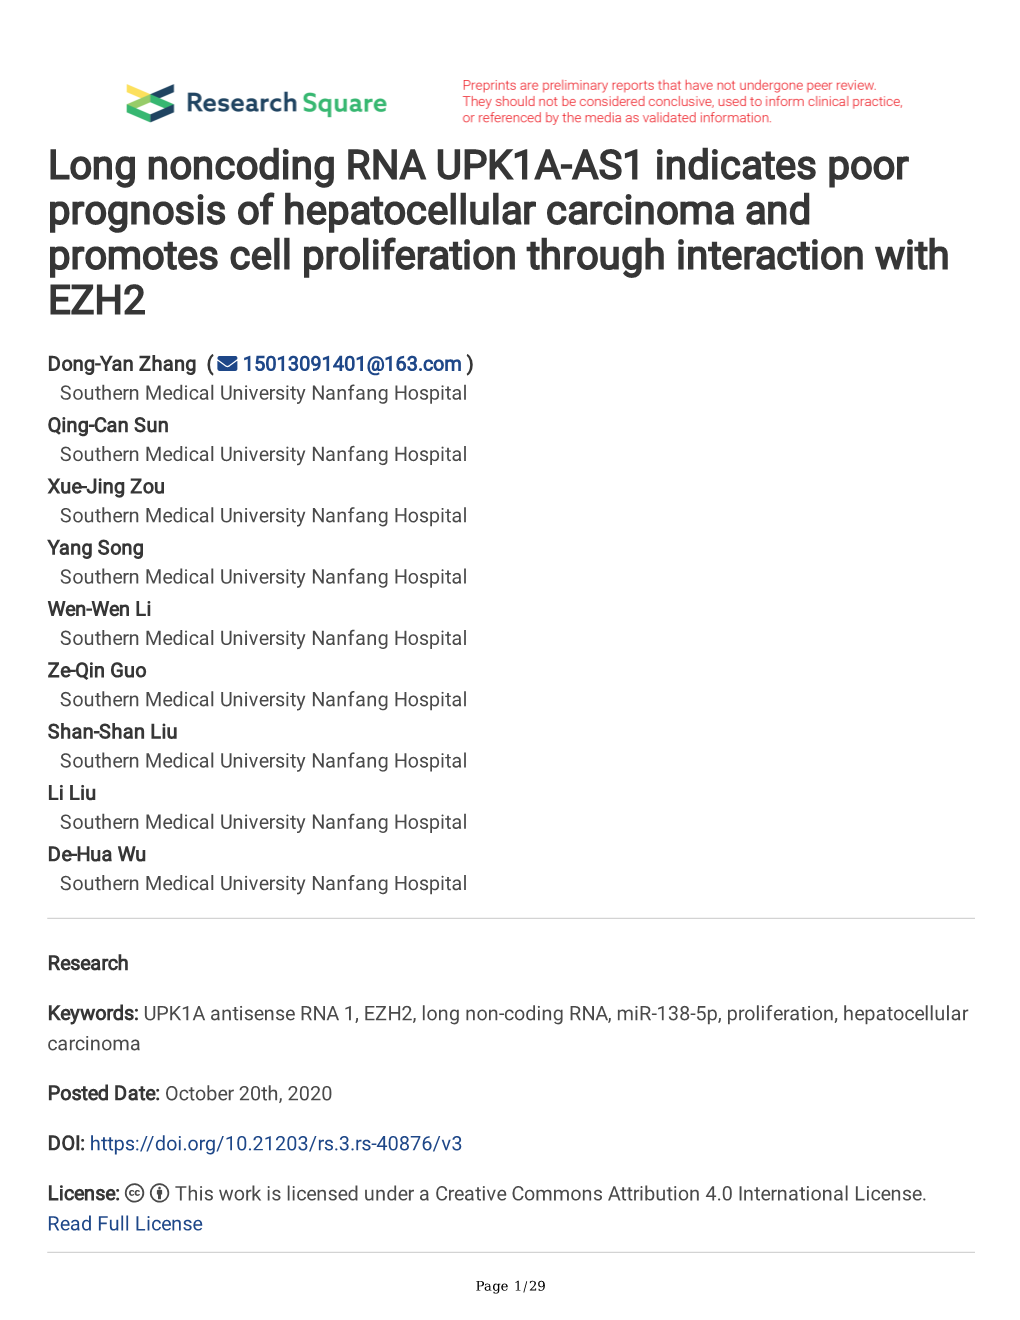 Long Noncoding RNA UPK1A-AS1 Indicates Poor Prognosis of Hepatocellular Carcinoma and Promotes Cell Proliferation Through Interaction with EZH2